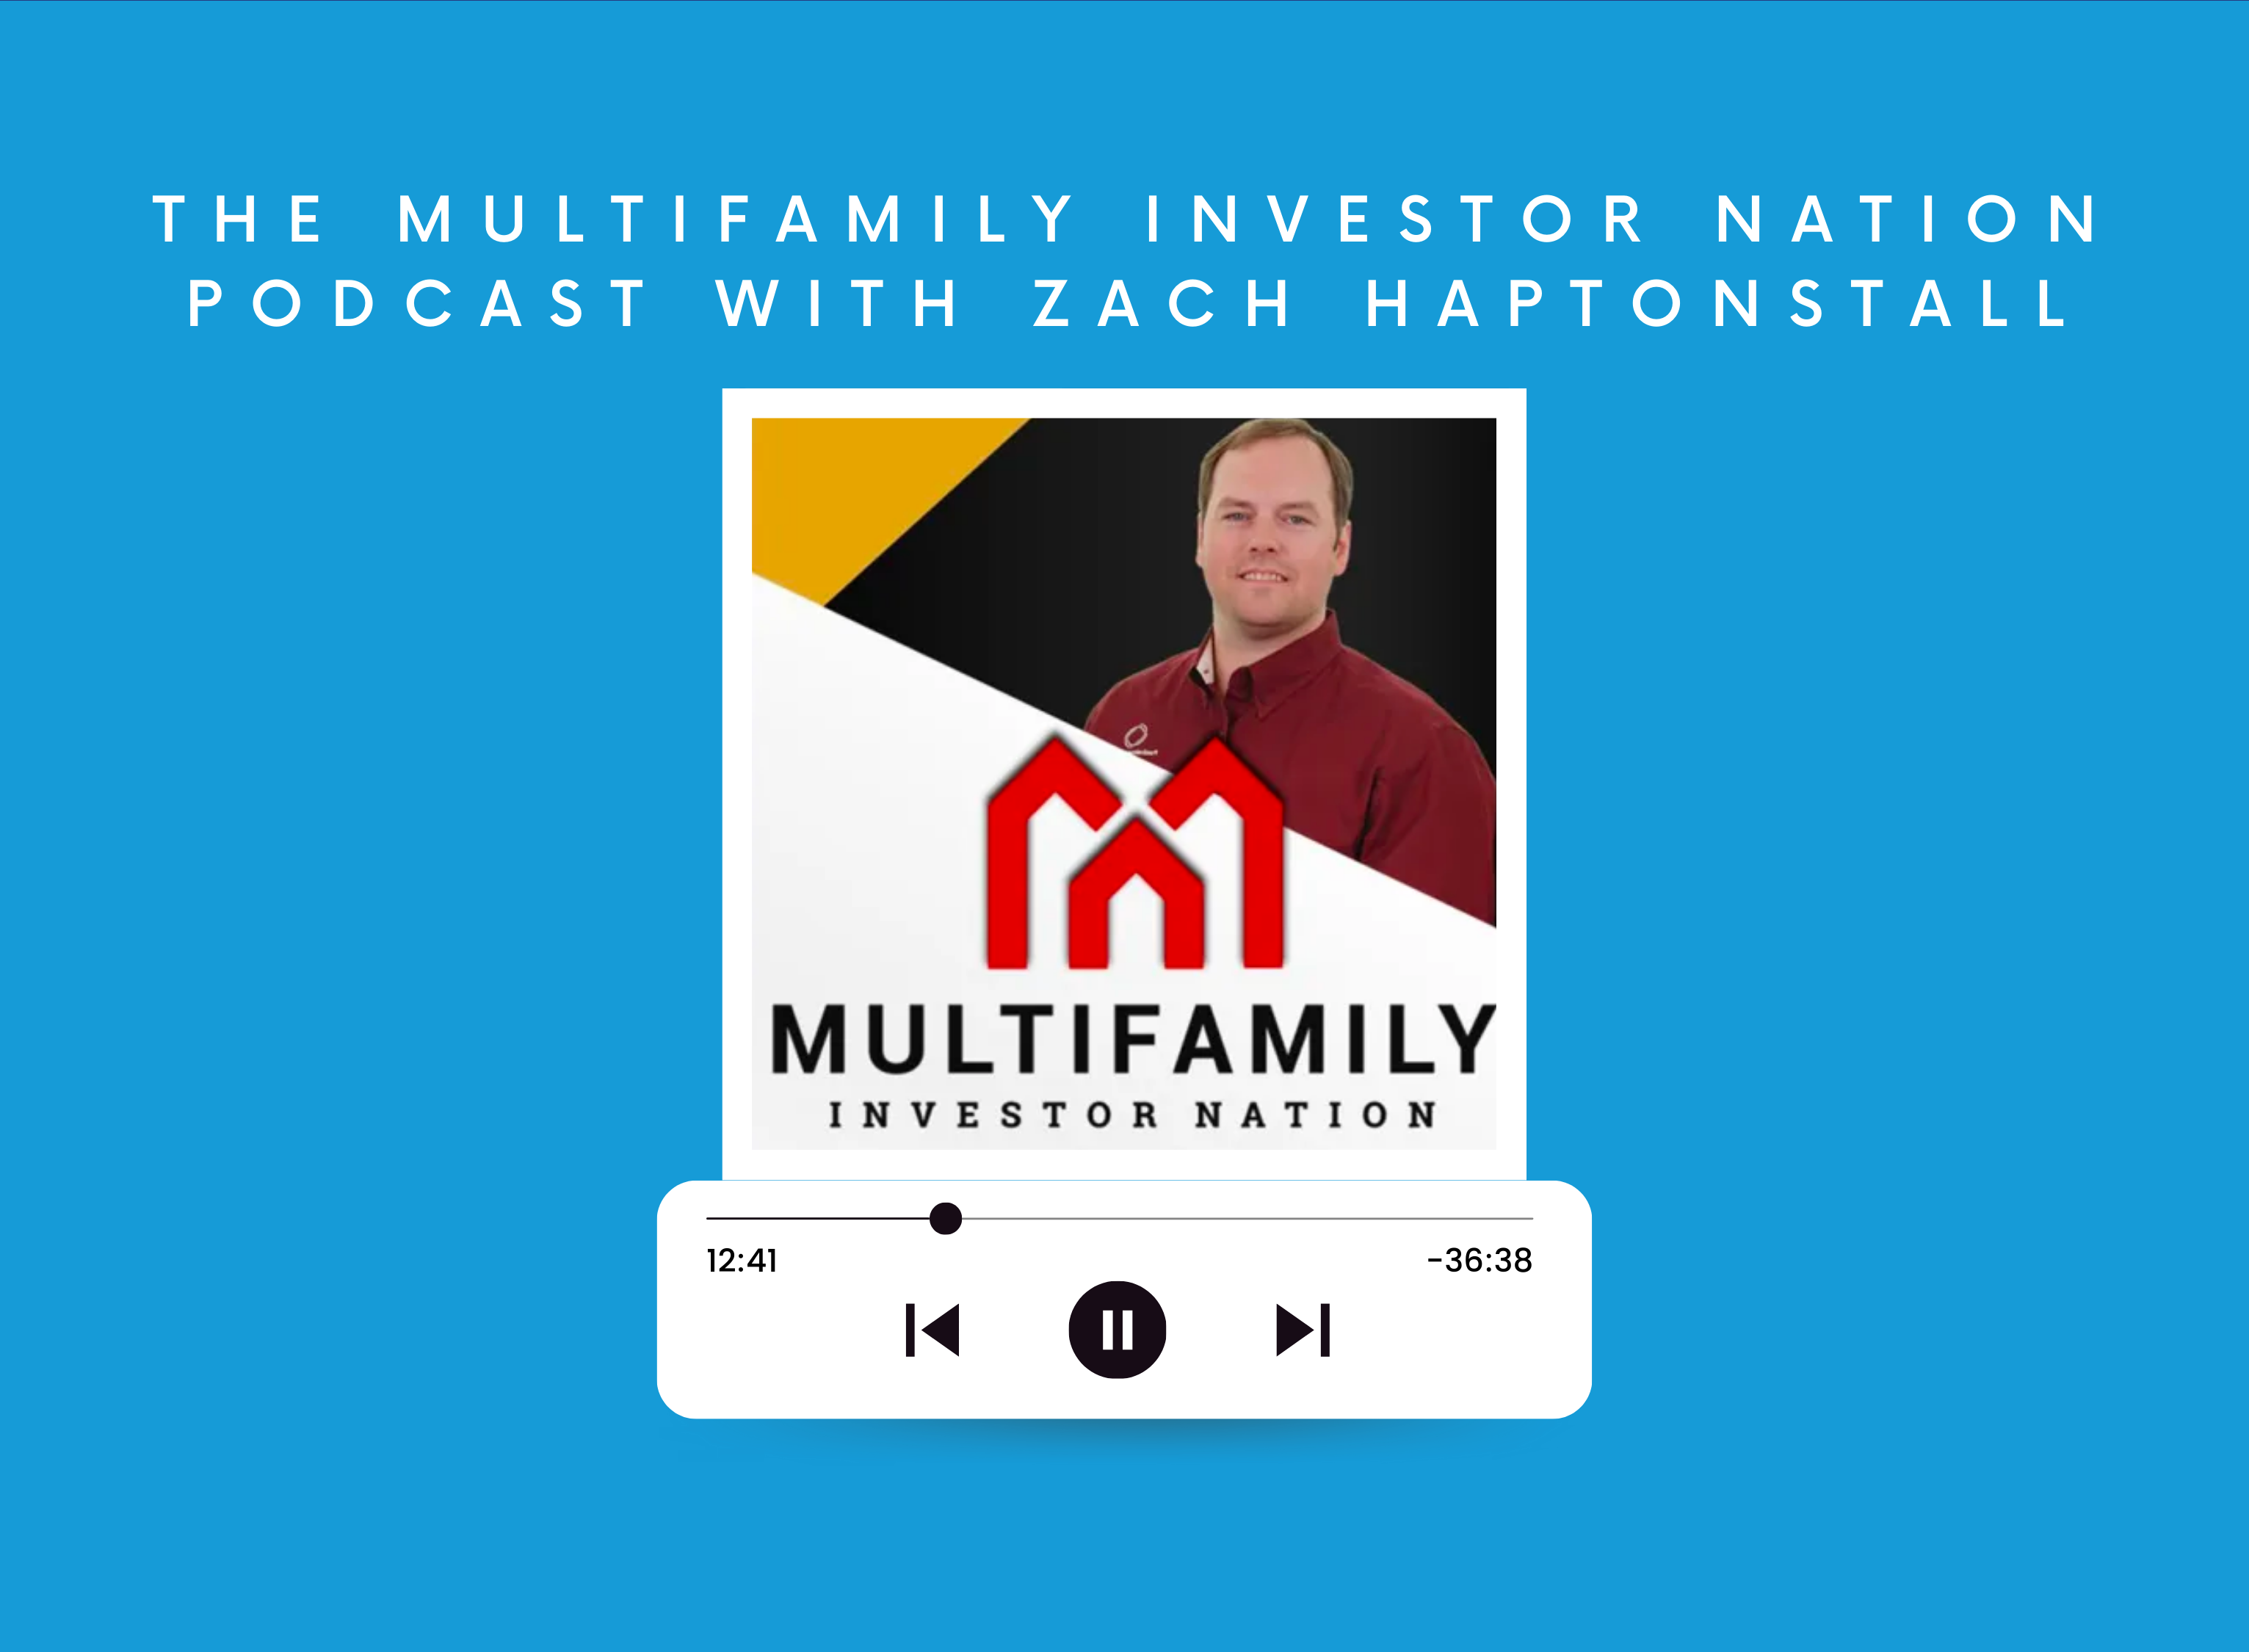 The Multifamily Investor Nation Podcast